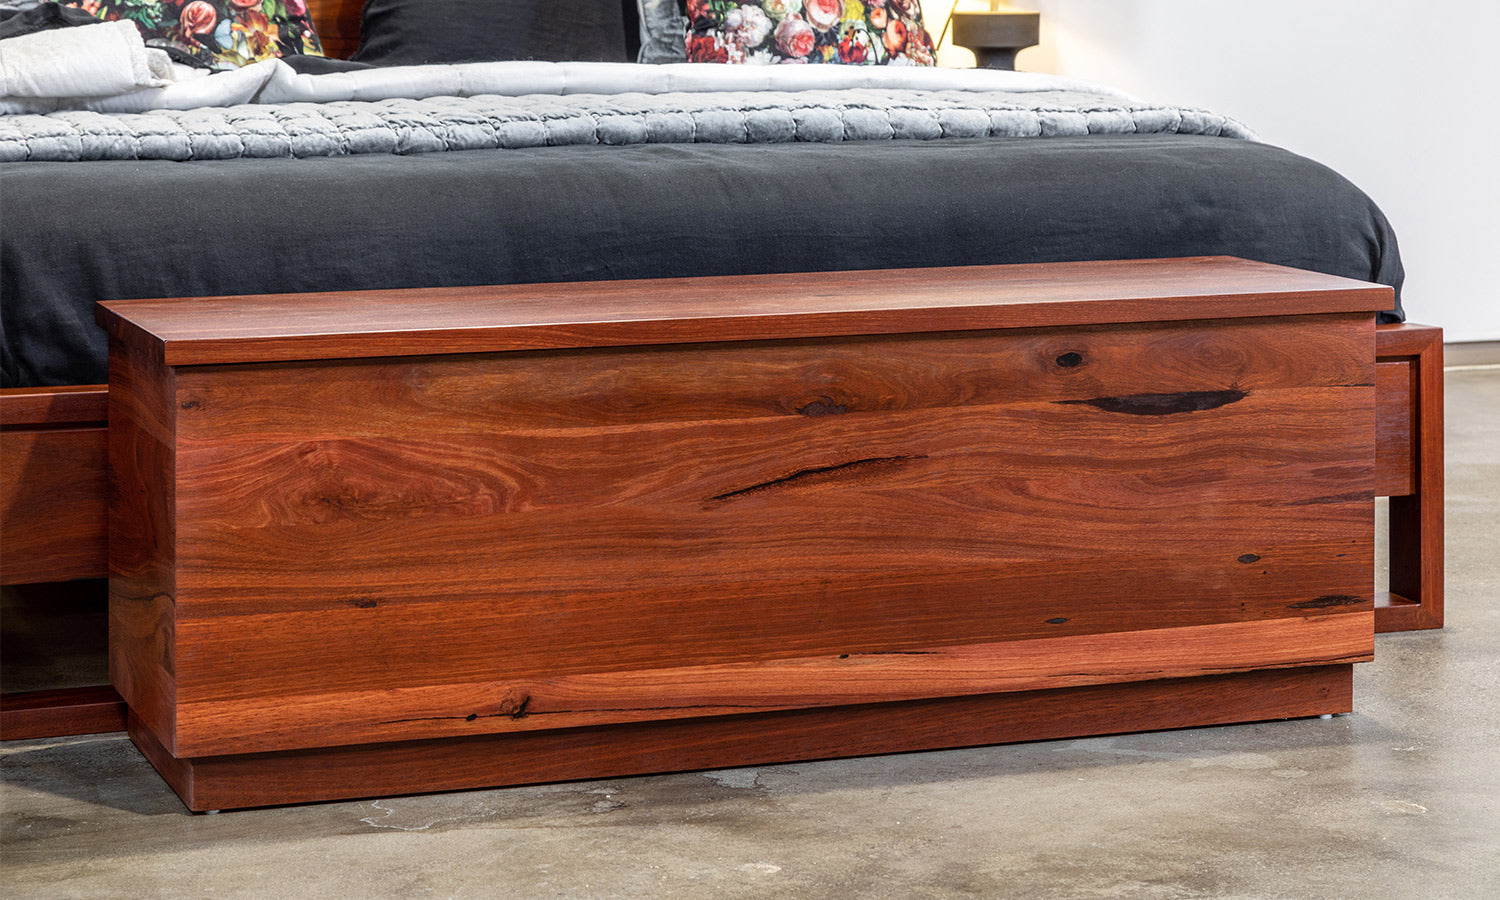 Apartment style solid jarrah timber wood blanket box chest bedroom suite Perth WA